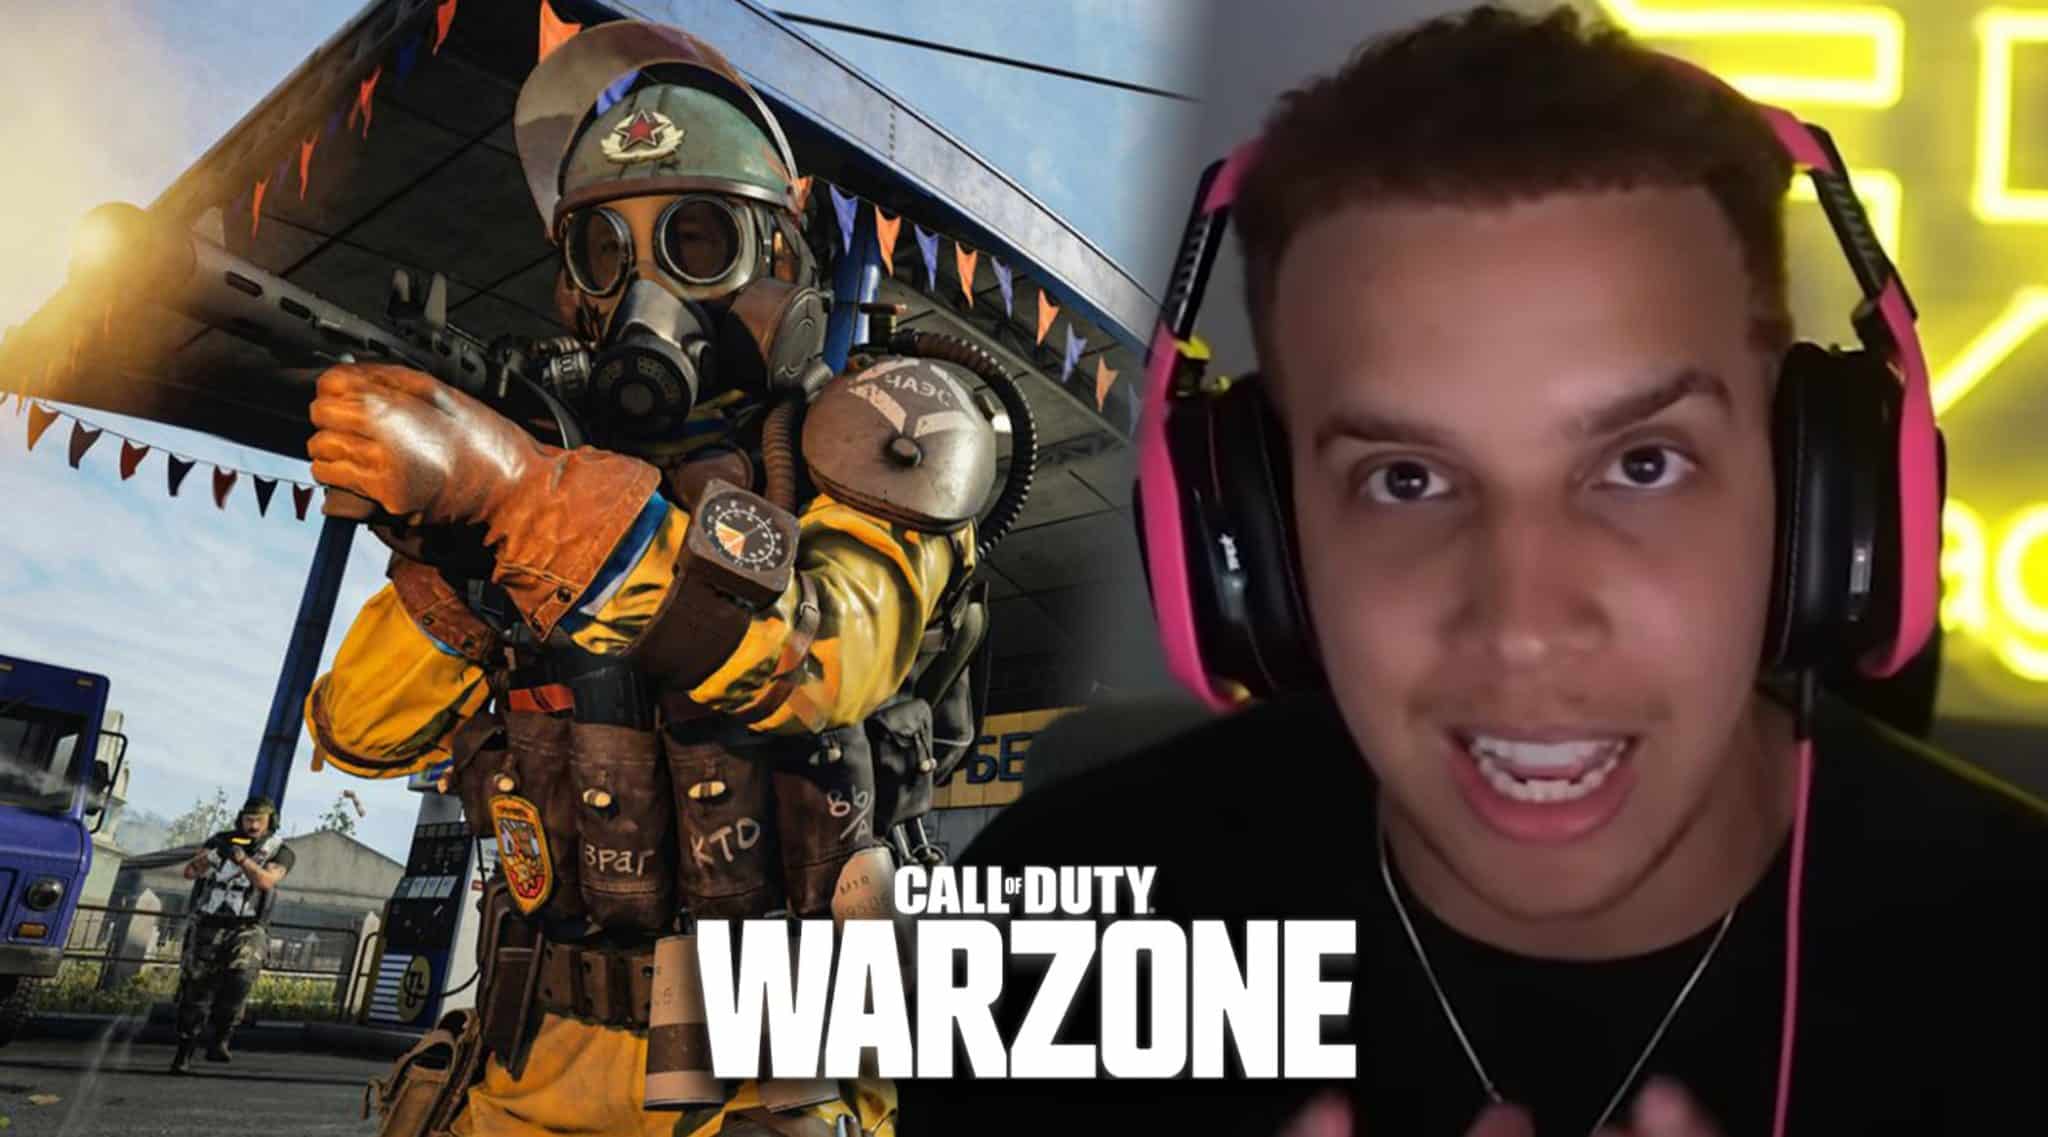 Warzone Swagg cheating accusations